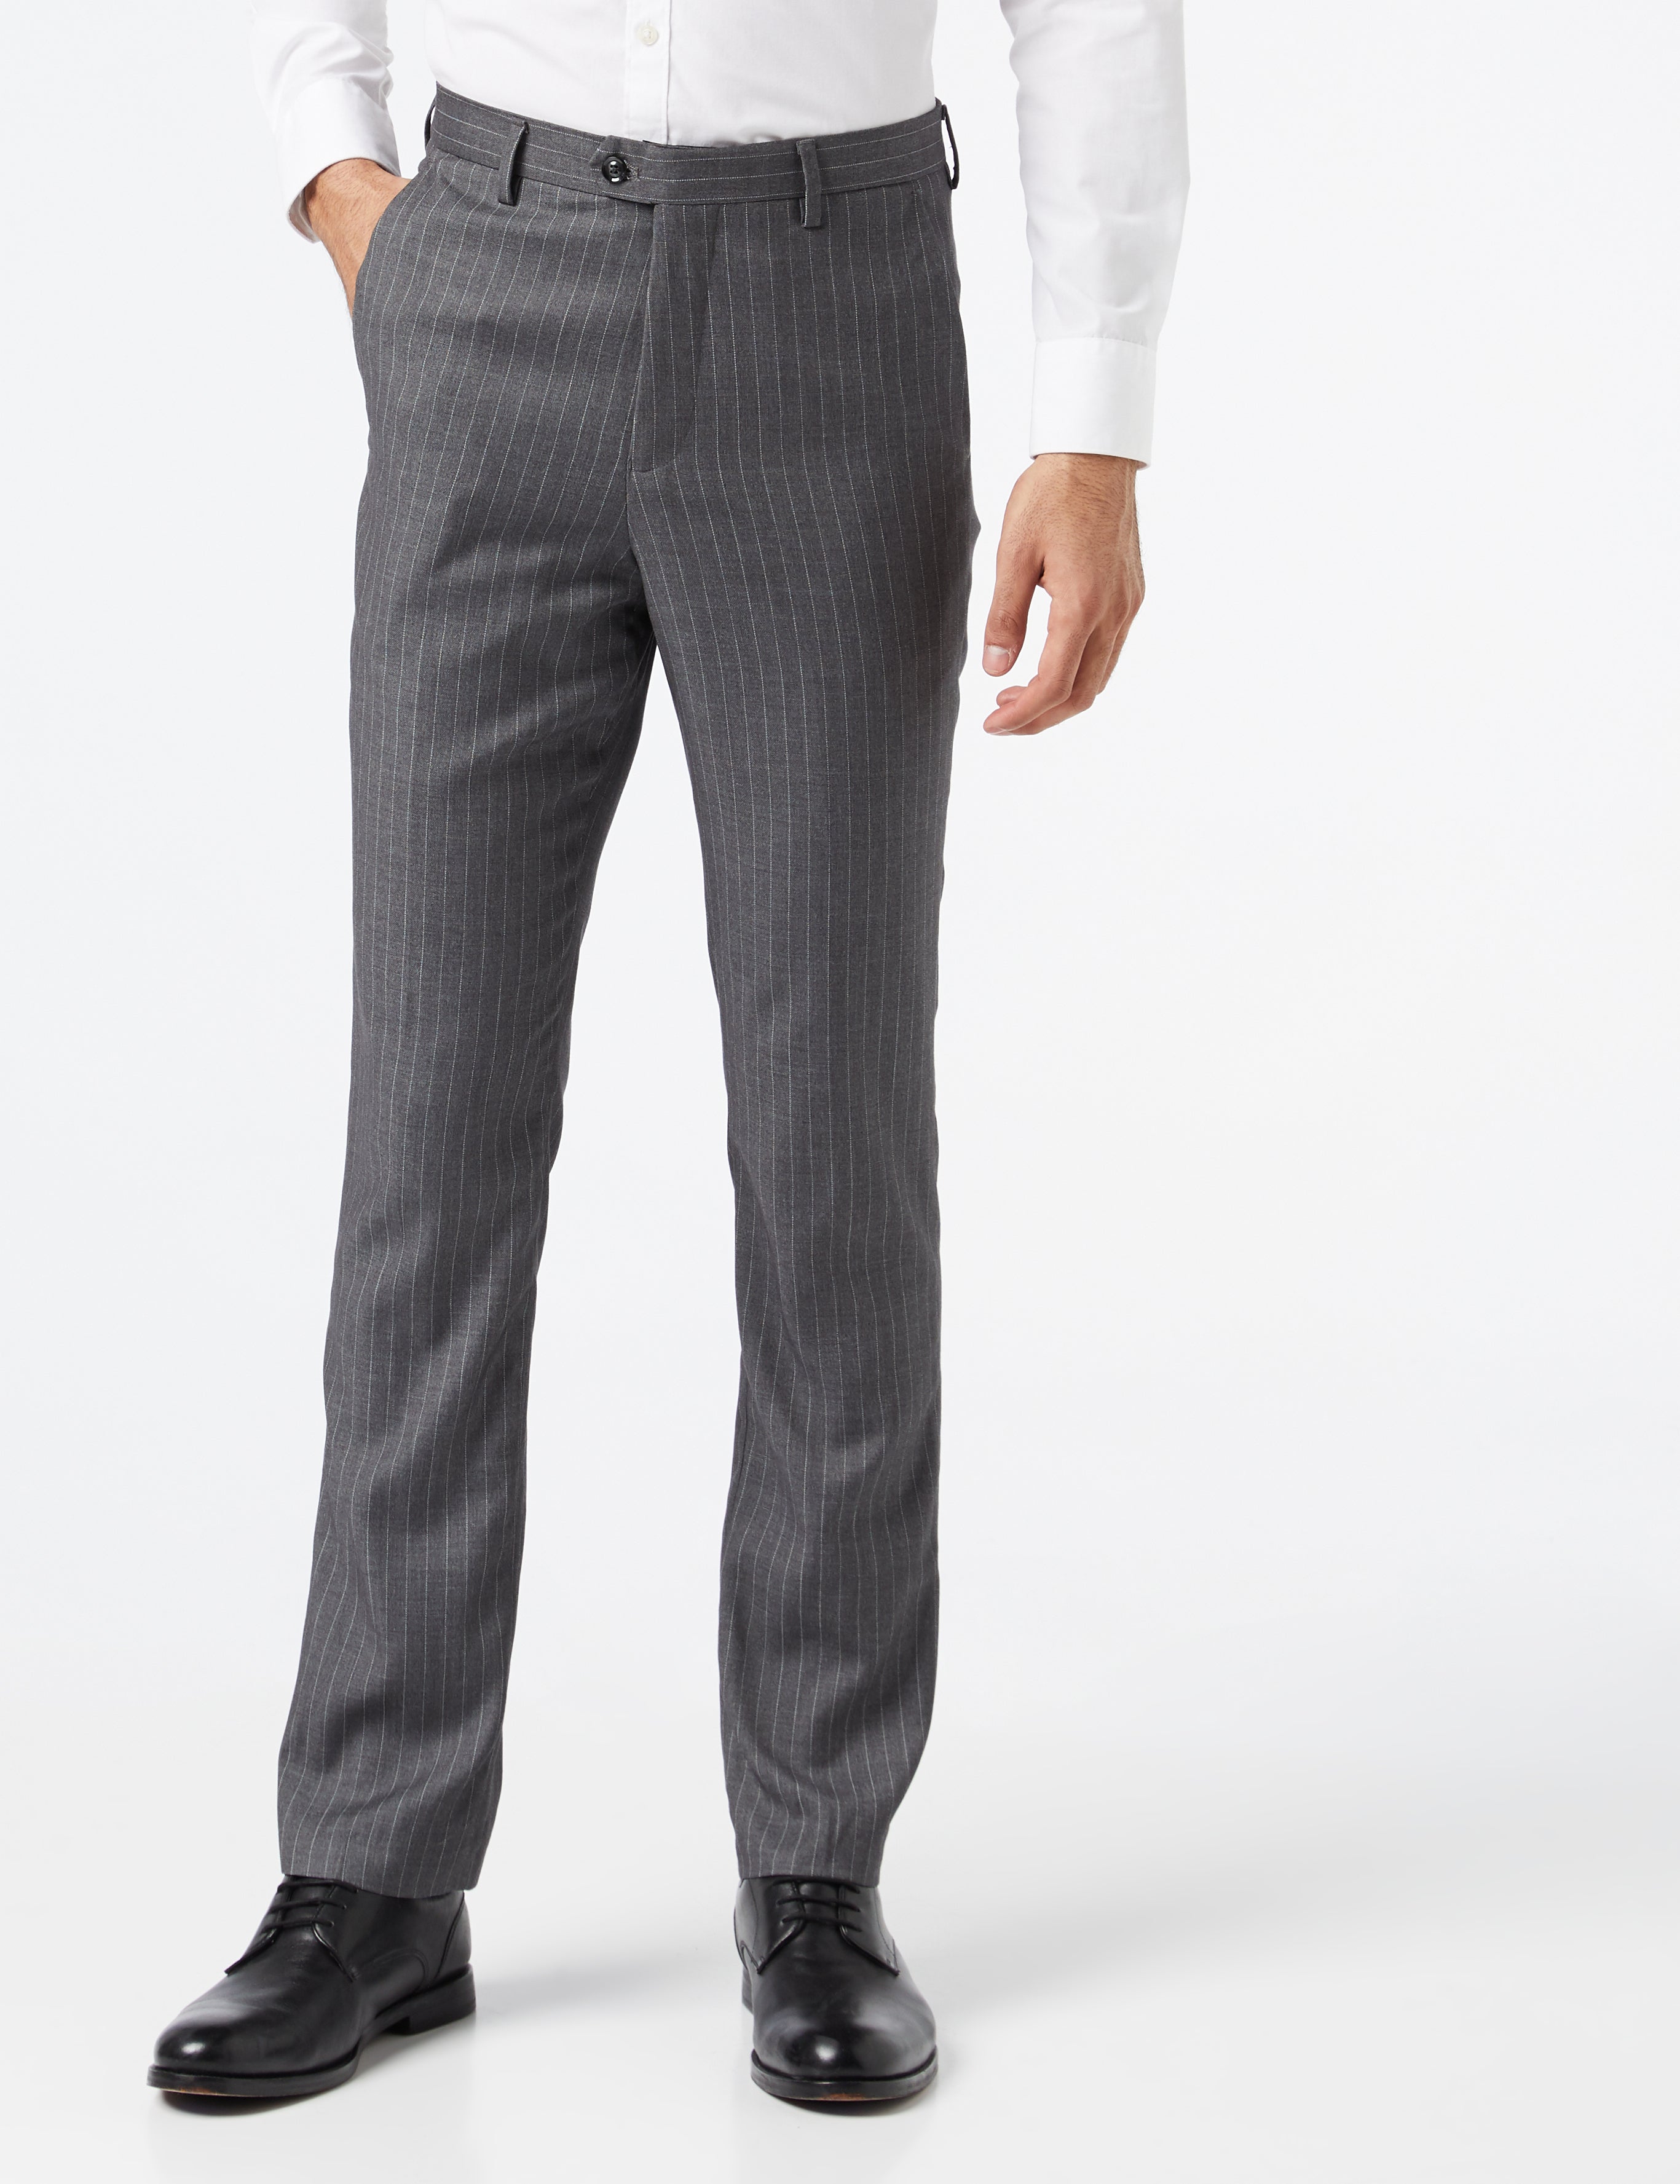 Men's White Pinstripe on Black Suit Trousers Tailored Fit Flat Front Dress  Pants [TRS-ALFRED-BLACK-32] at  Men's Clothing store